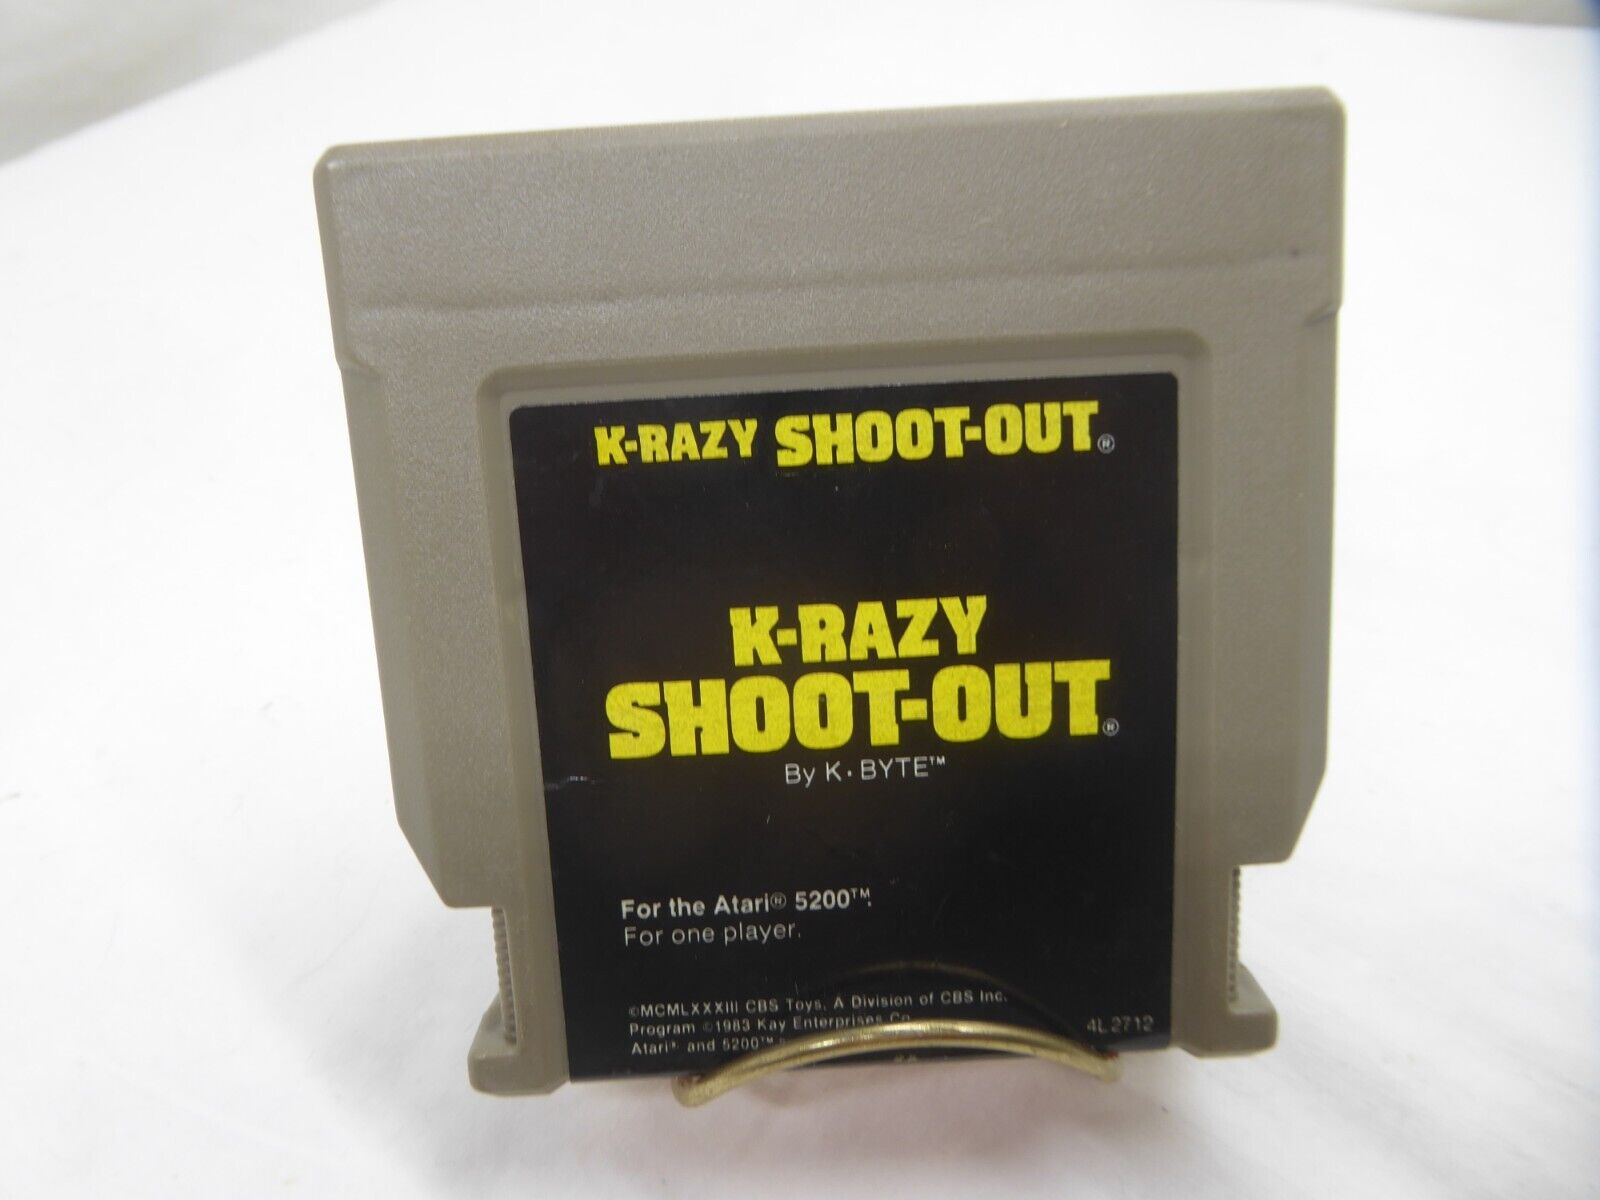 K-Razy Shoot-out (Atari 5200, 1983) Tested and working